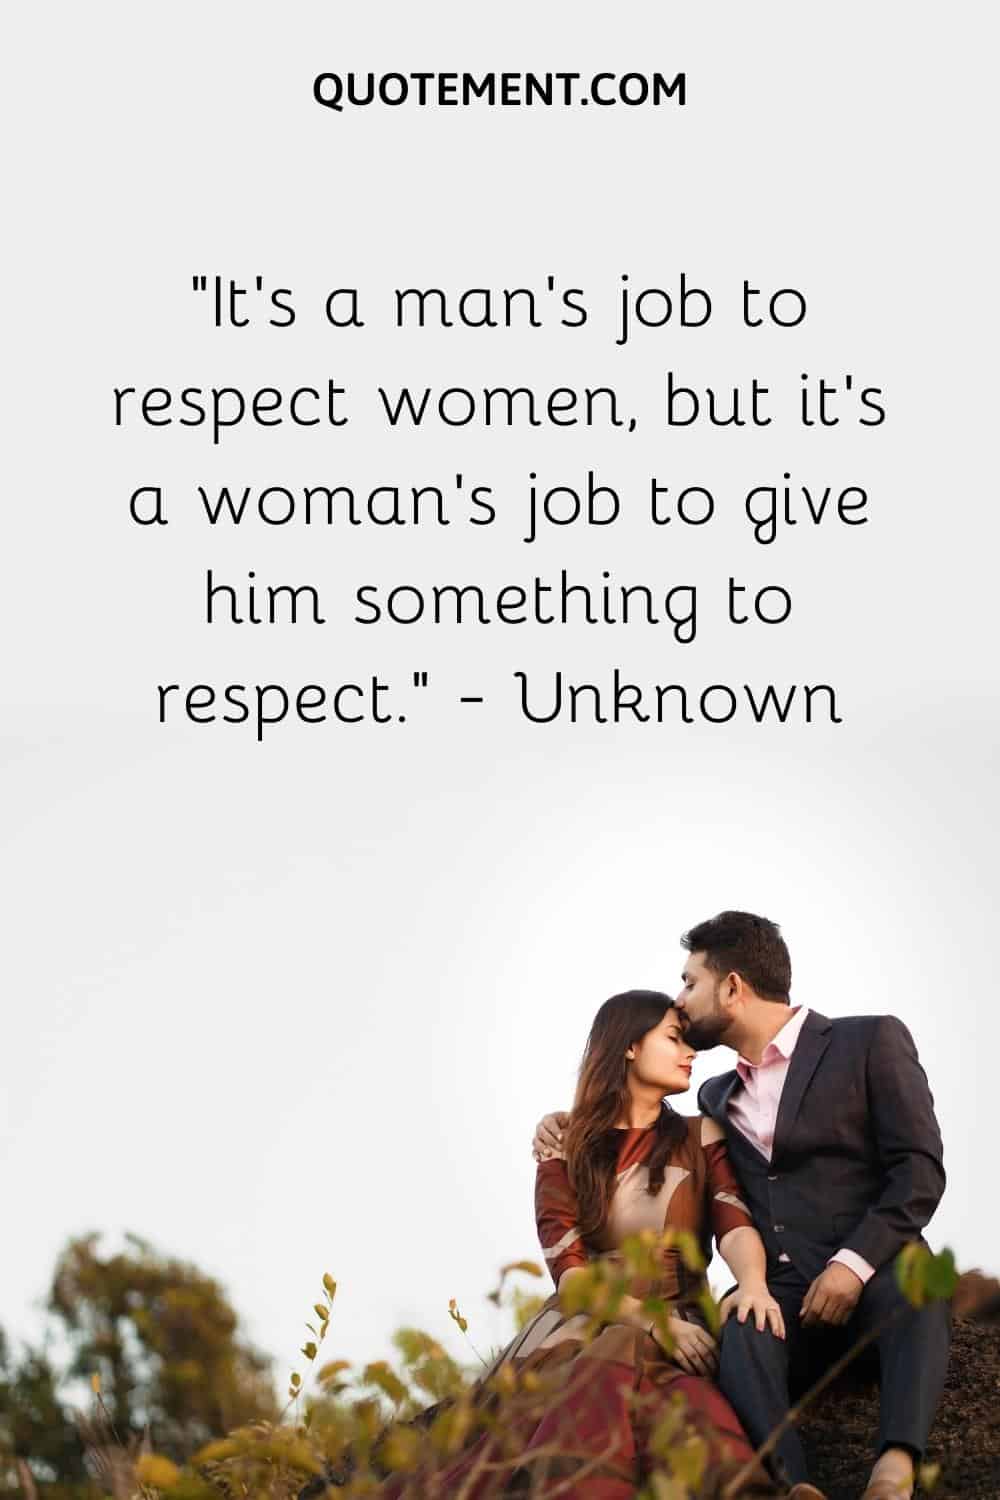 It’s a man’s job to respect women, but it’s a woman’s job to give him something to respect